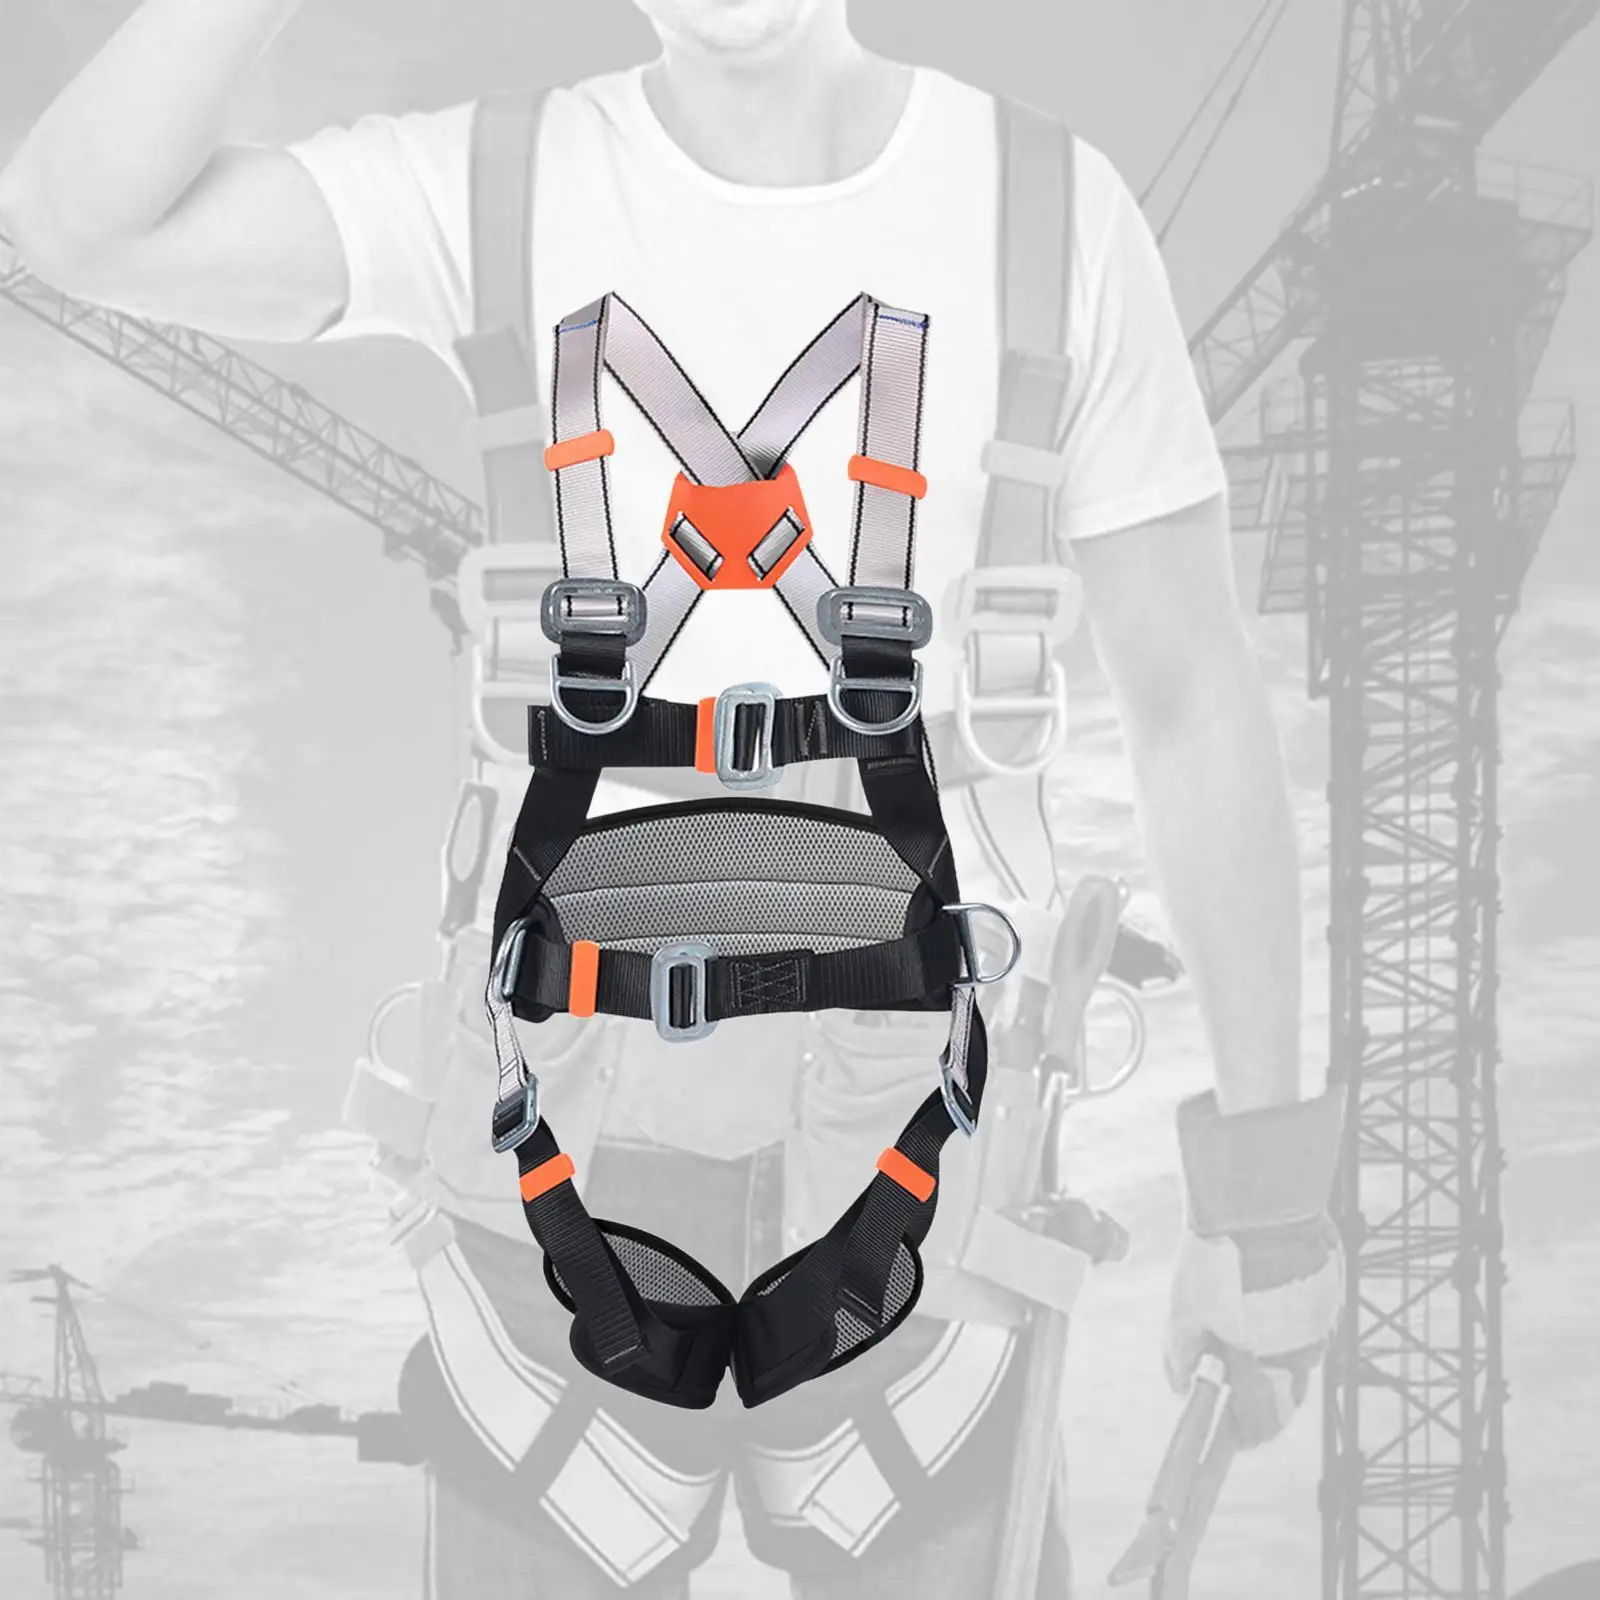 Professional Rock Climbing Harness Full Body Safety  Anti Fall Removable Gear Fall  Equipment Gear Tool  Teen